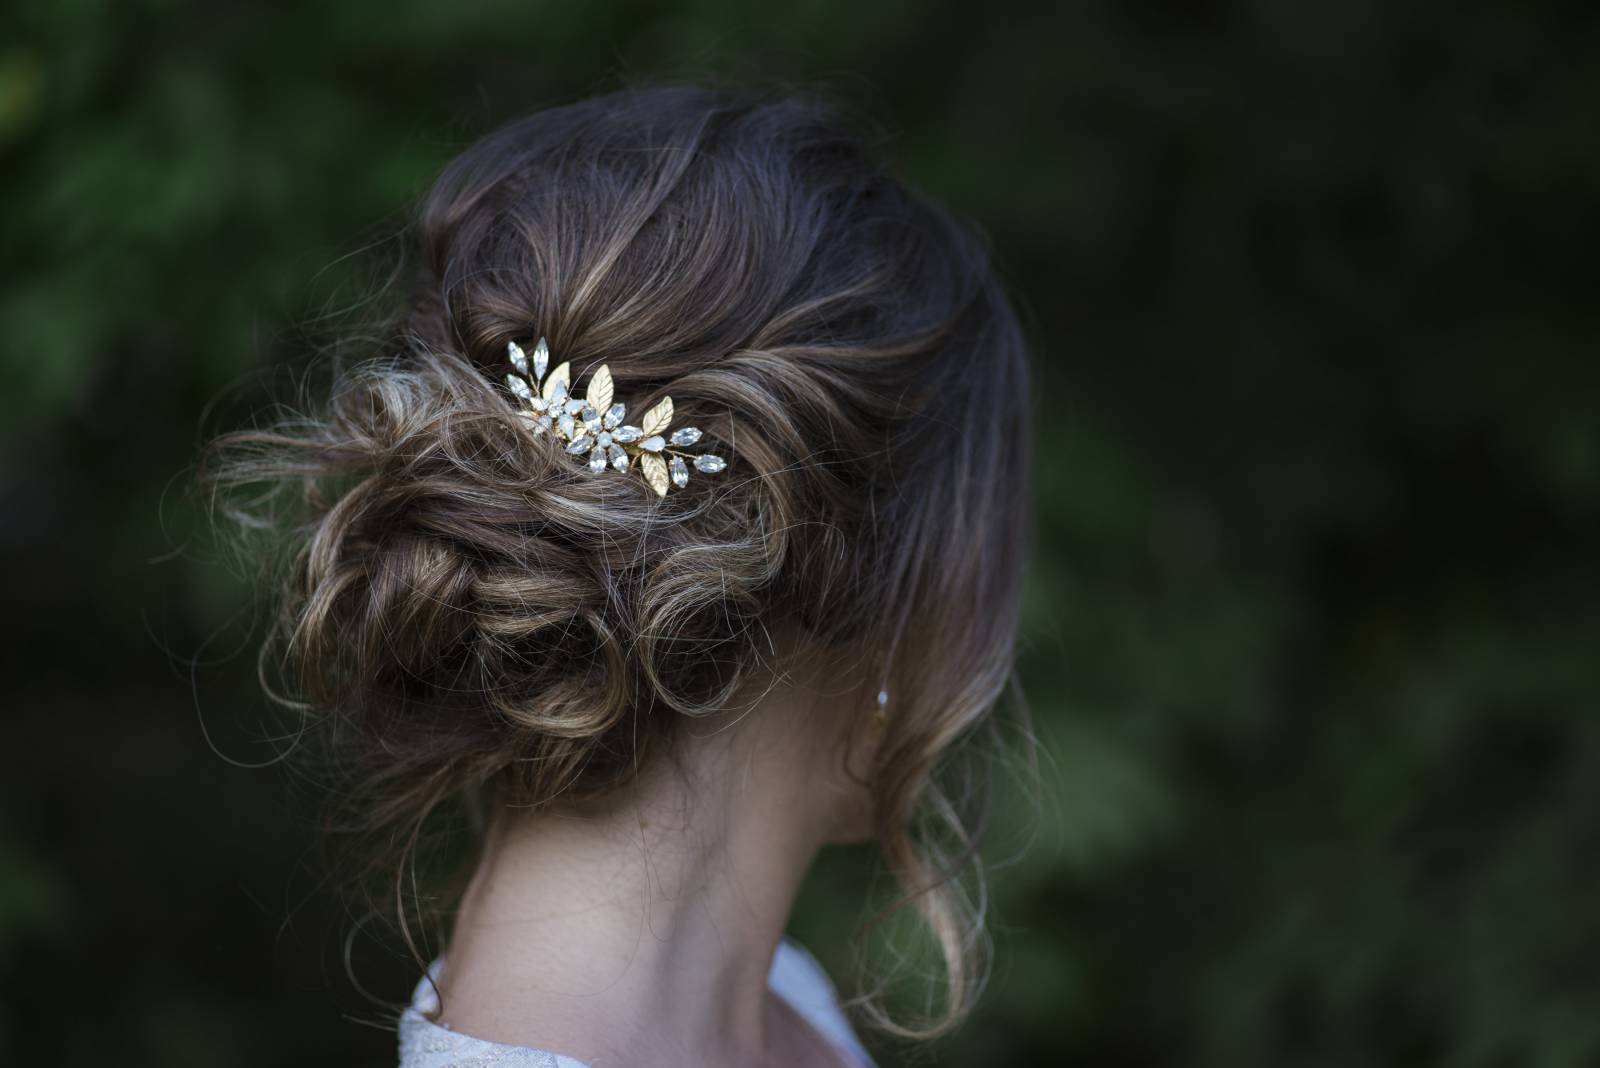 Bride's Unique Hair Style with Accessories | The Wedding Standard